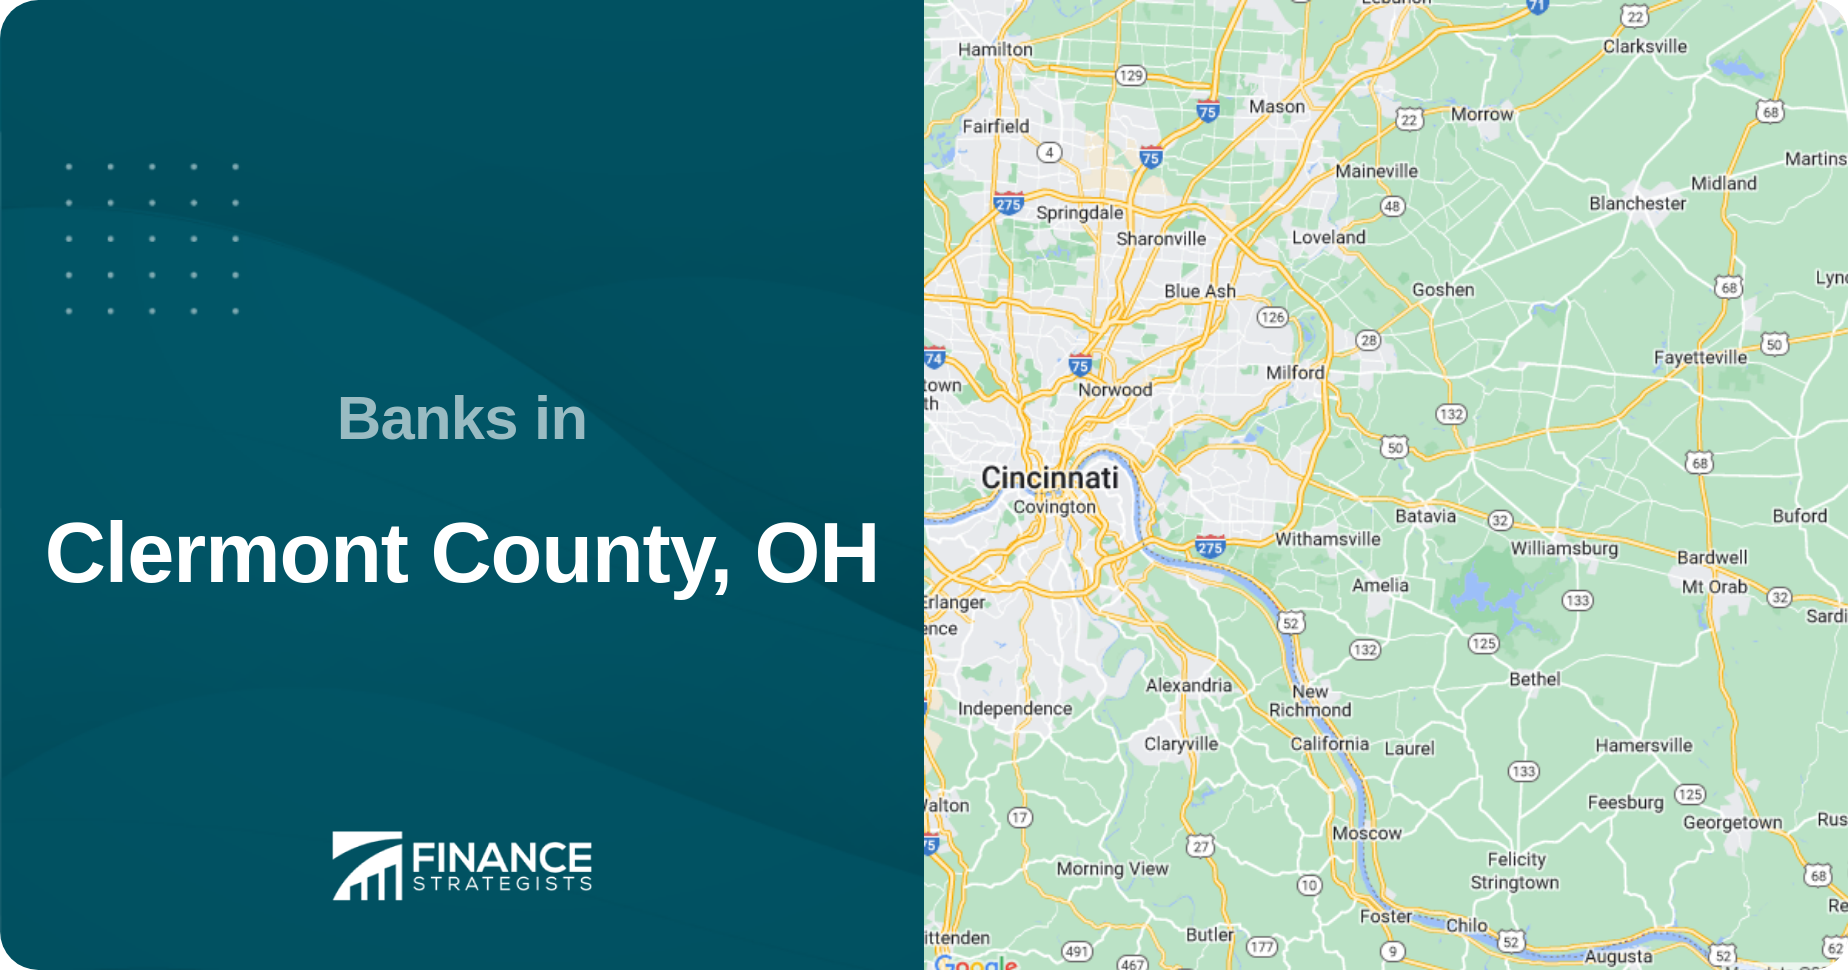 Banks in Clermont County, OH